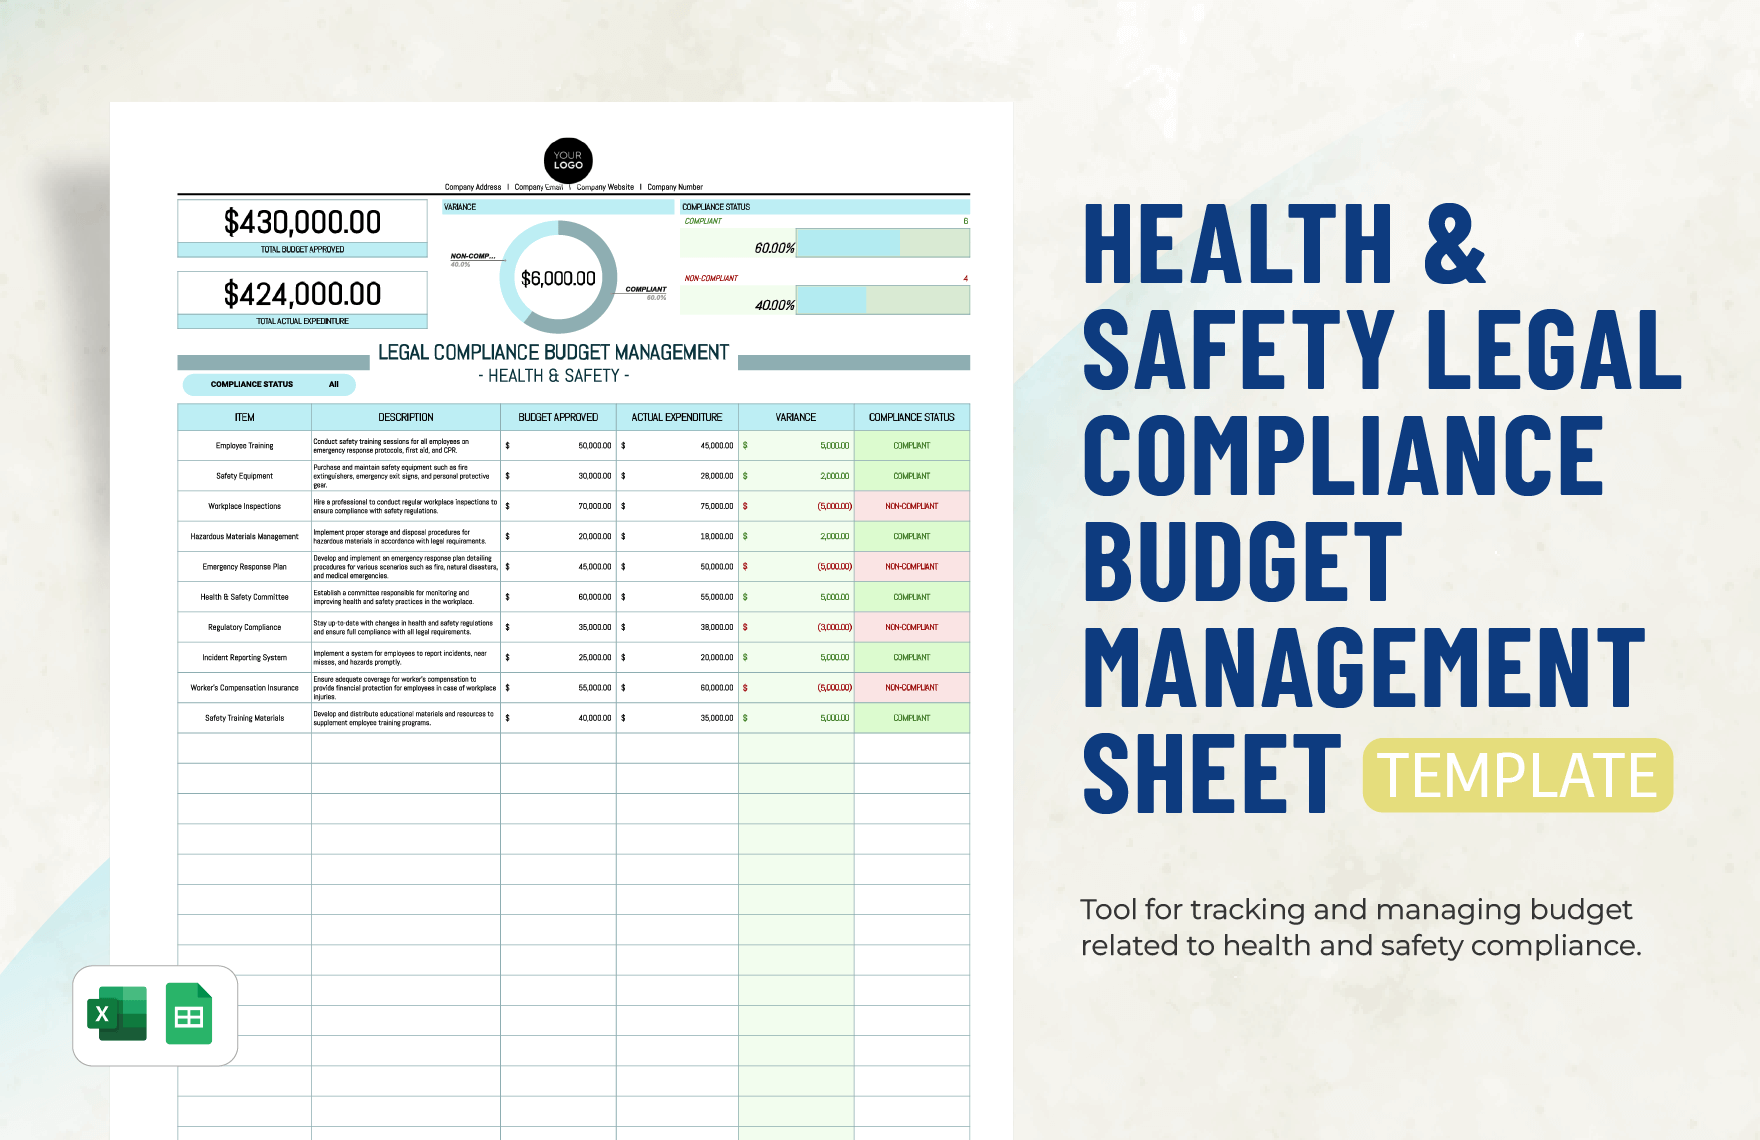 Health & Safety Legal Compliance Budget Management Sheet Template in Excel, Google Sheets